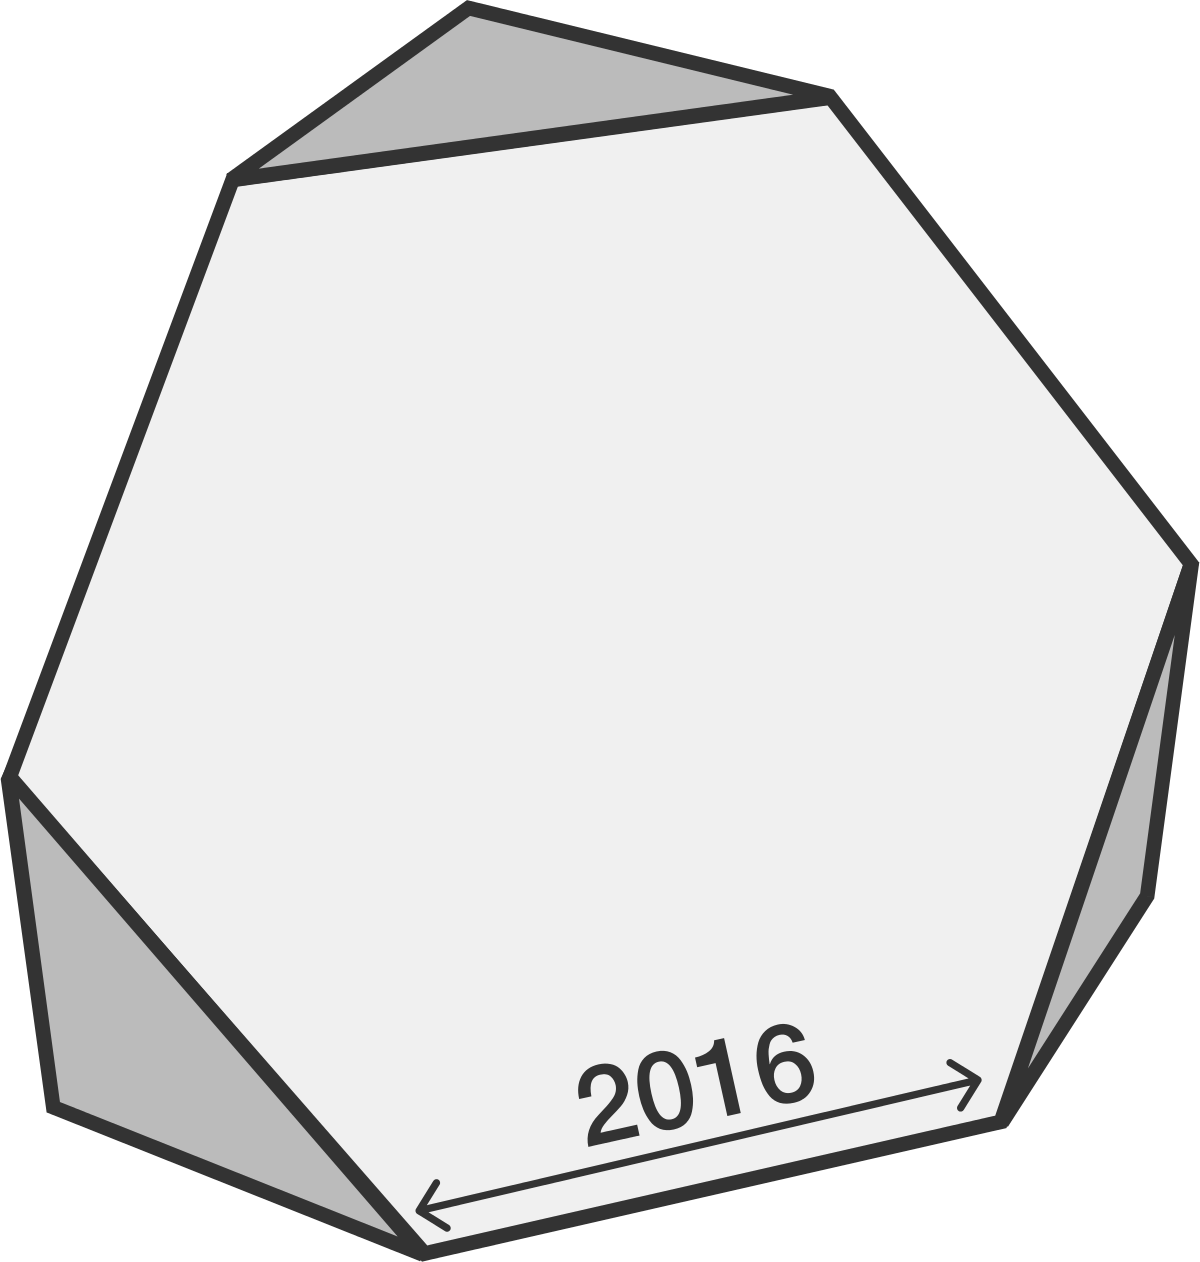 Cube clipart surface area. Brilliant math science wiki